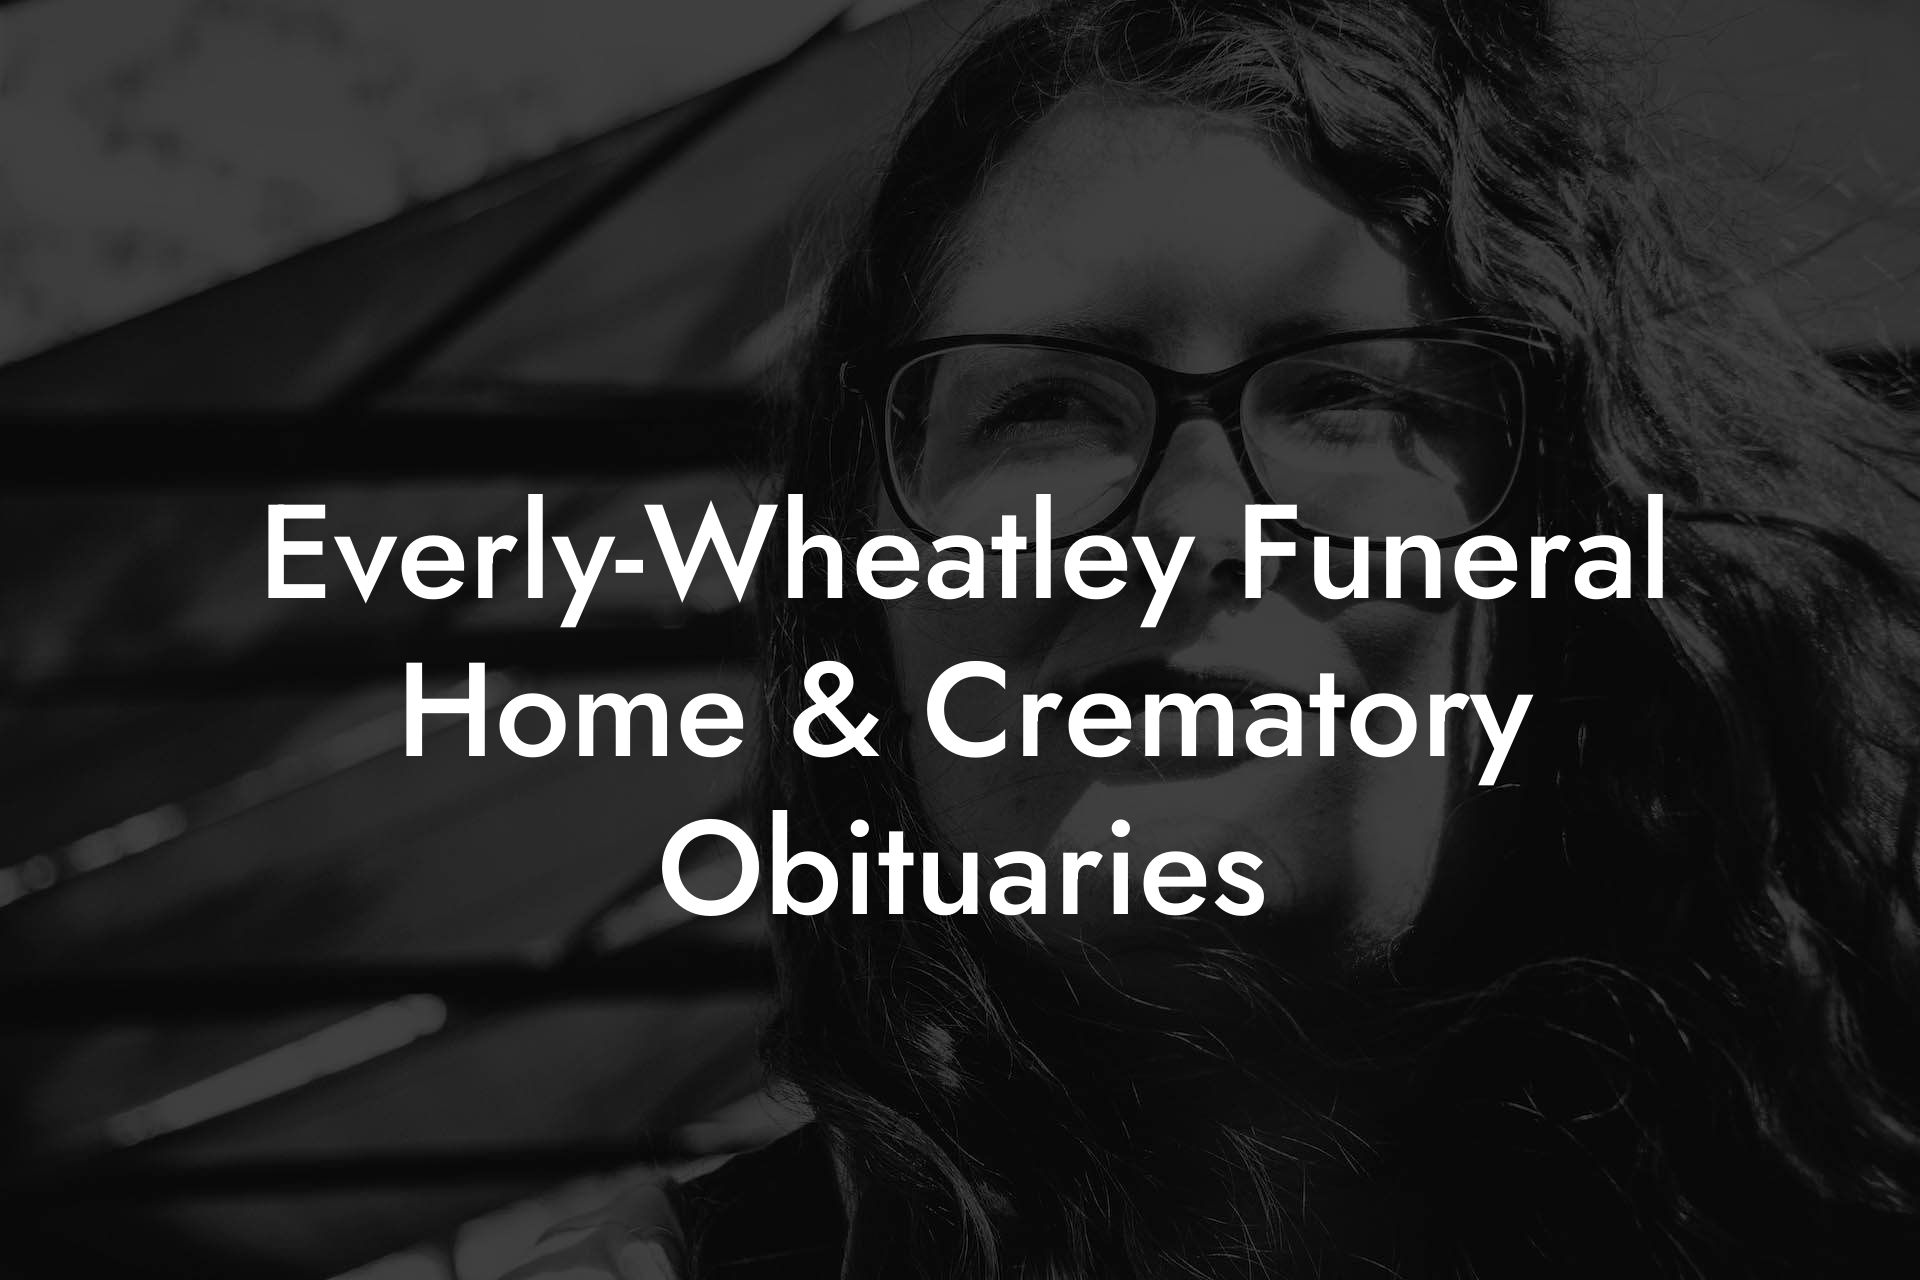 Everly-Wheatley Funeral Home & Crematory Obituaries